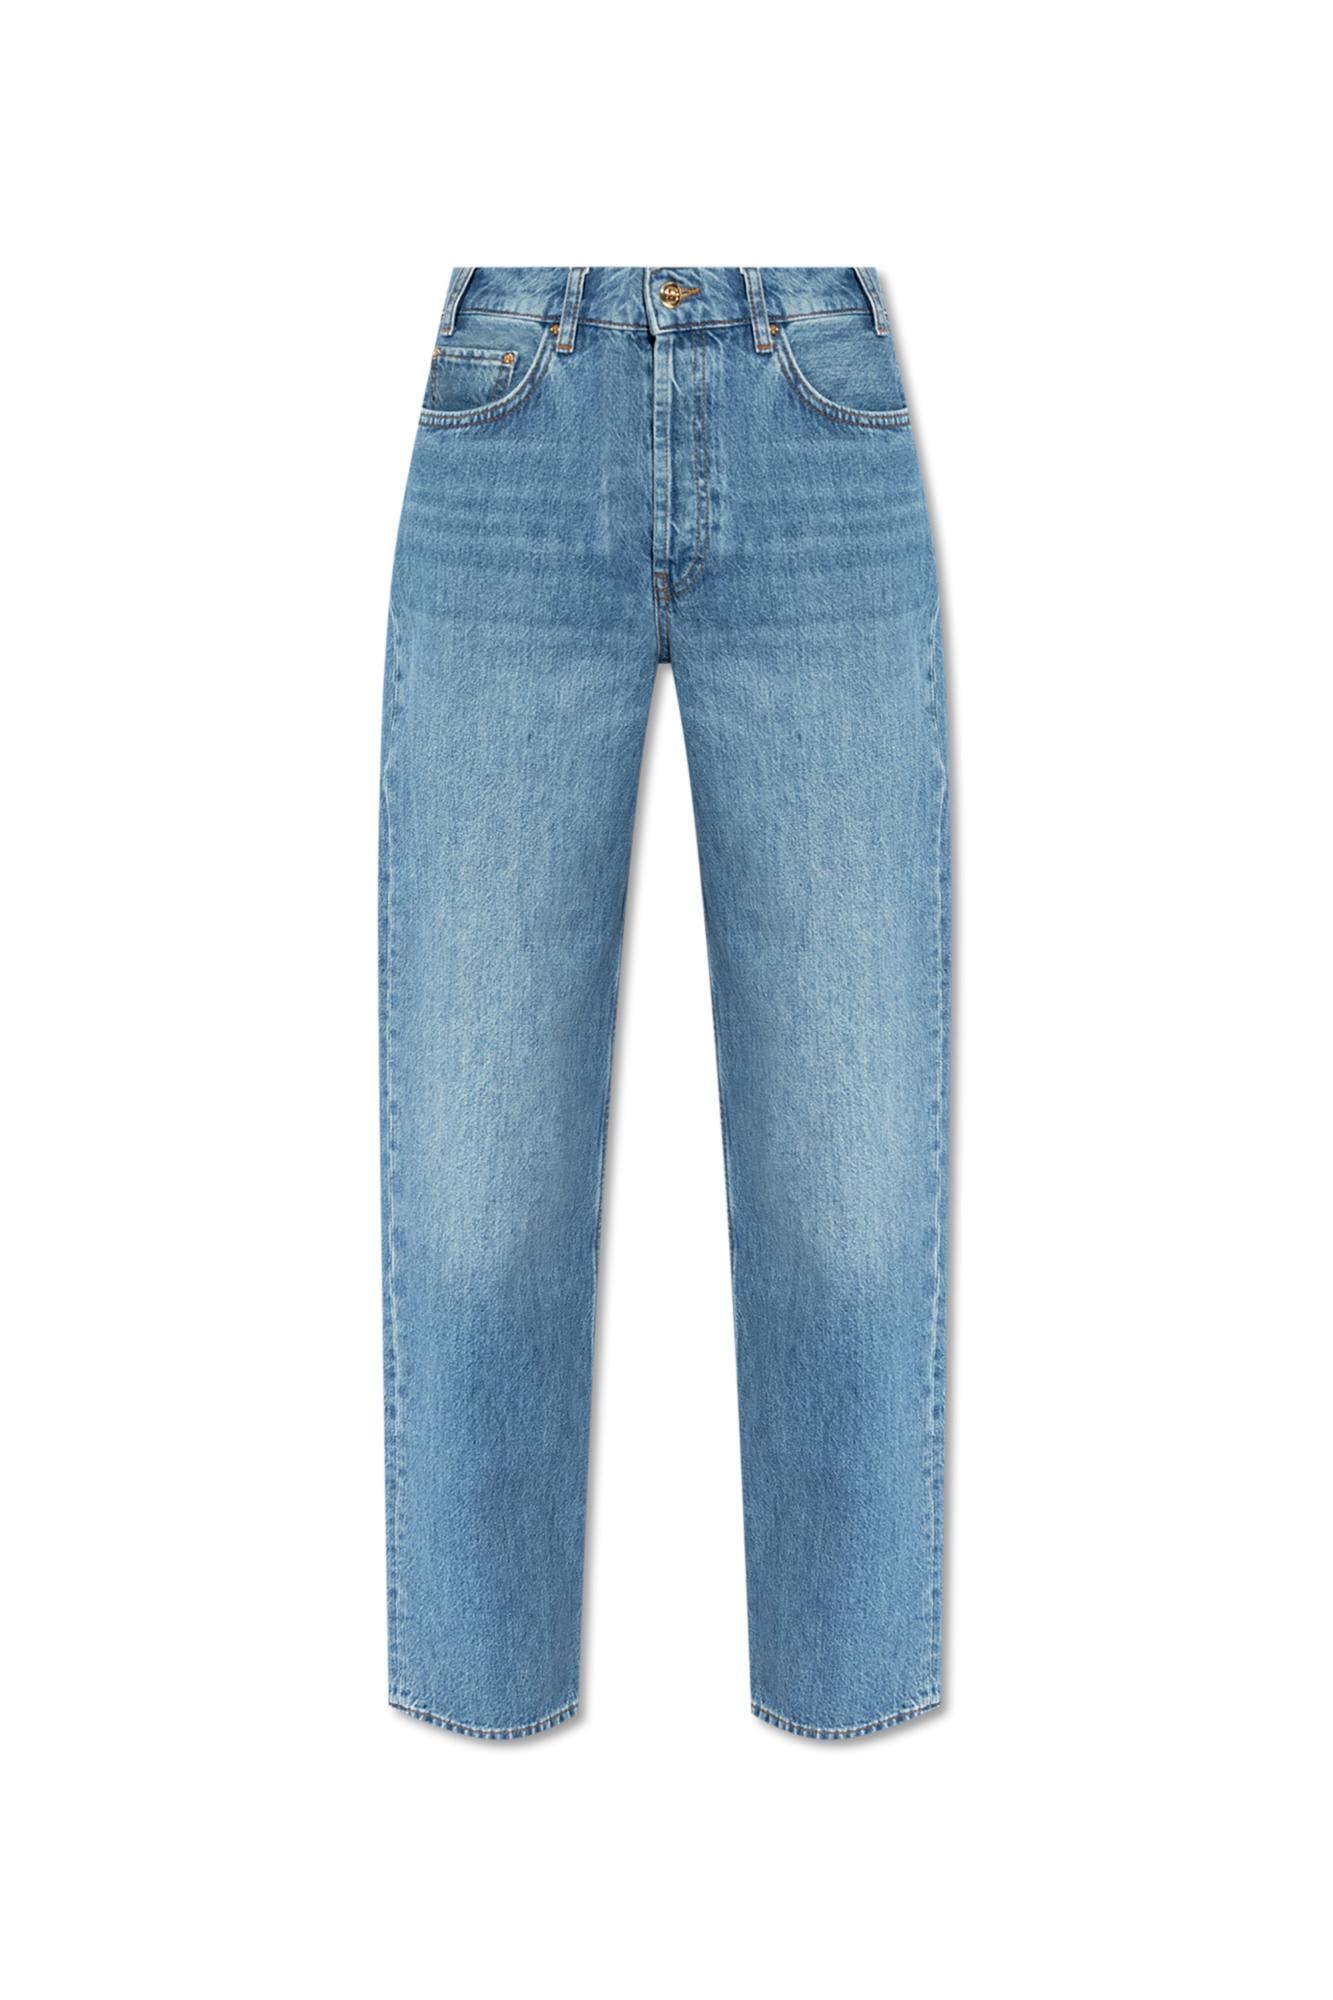 Relaxed Type Jeans